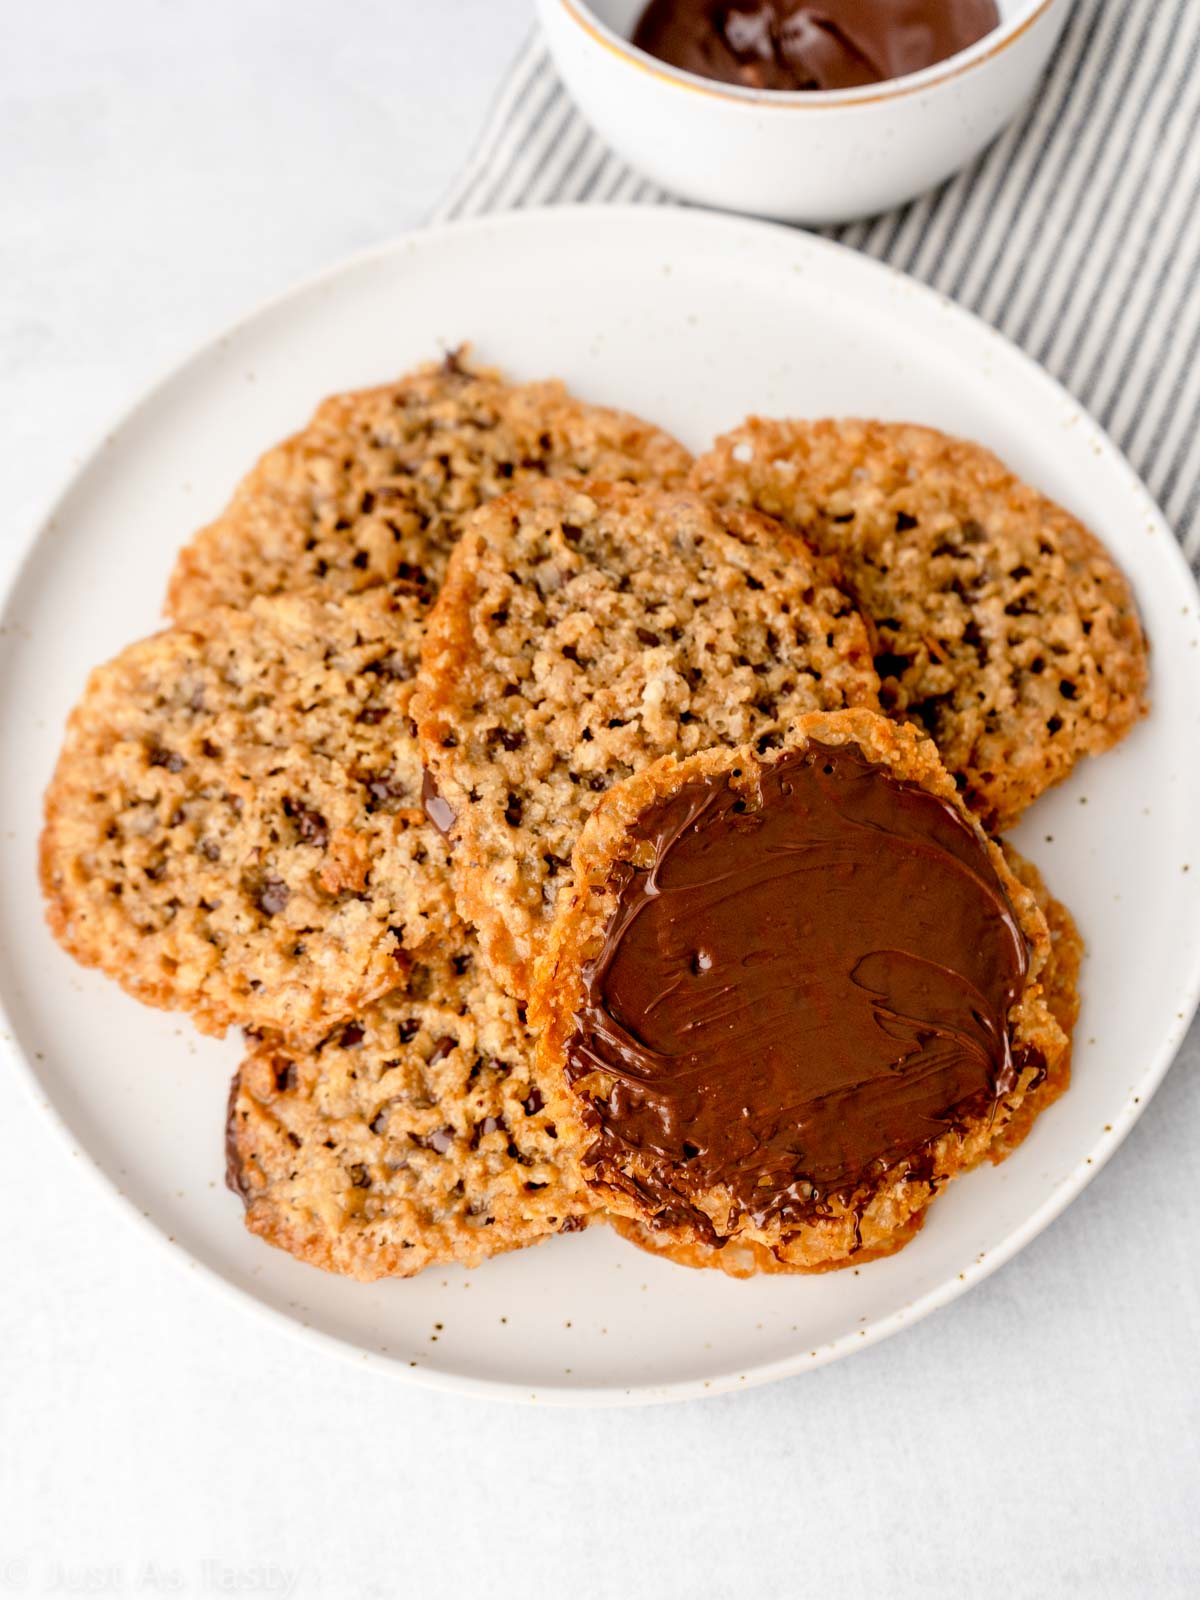 Oatmeal lace cookies on a plate. One is topped with melted chocolate.  